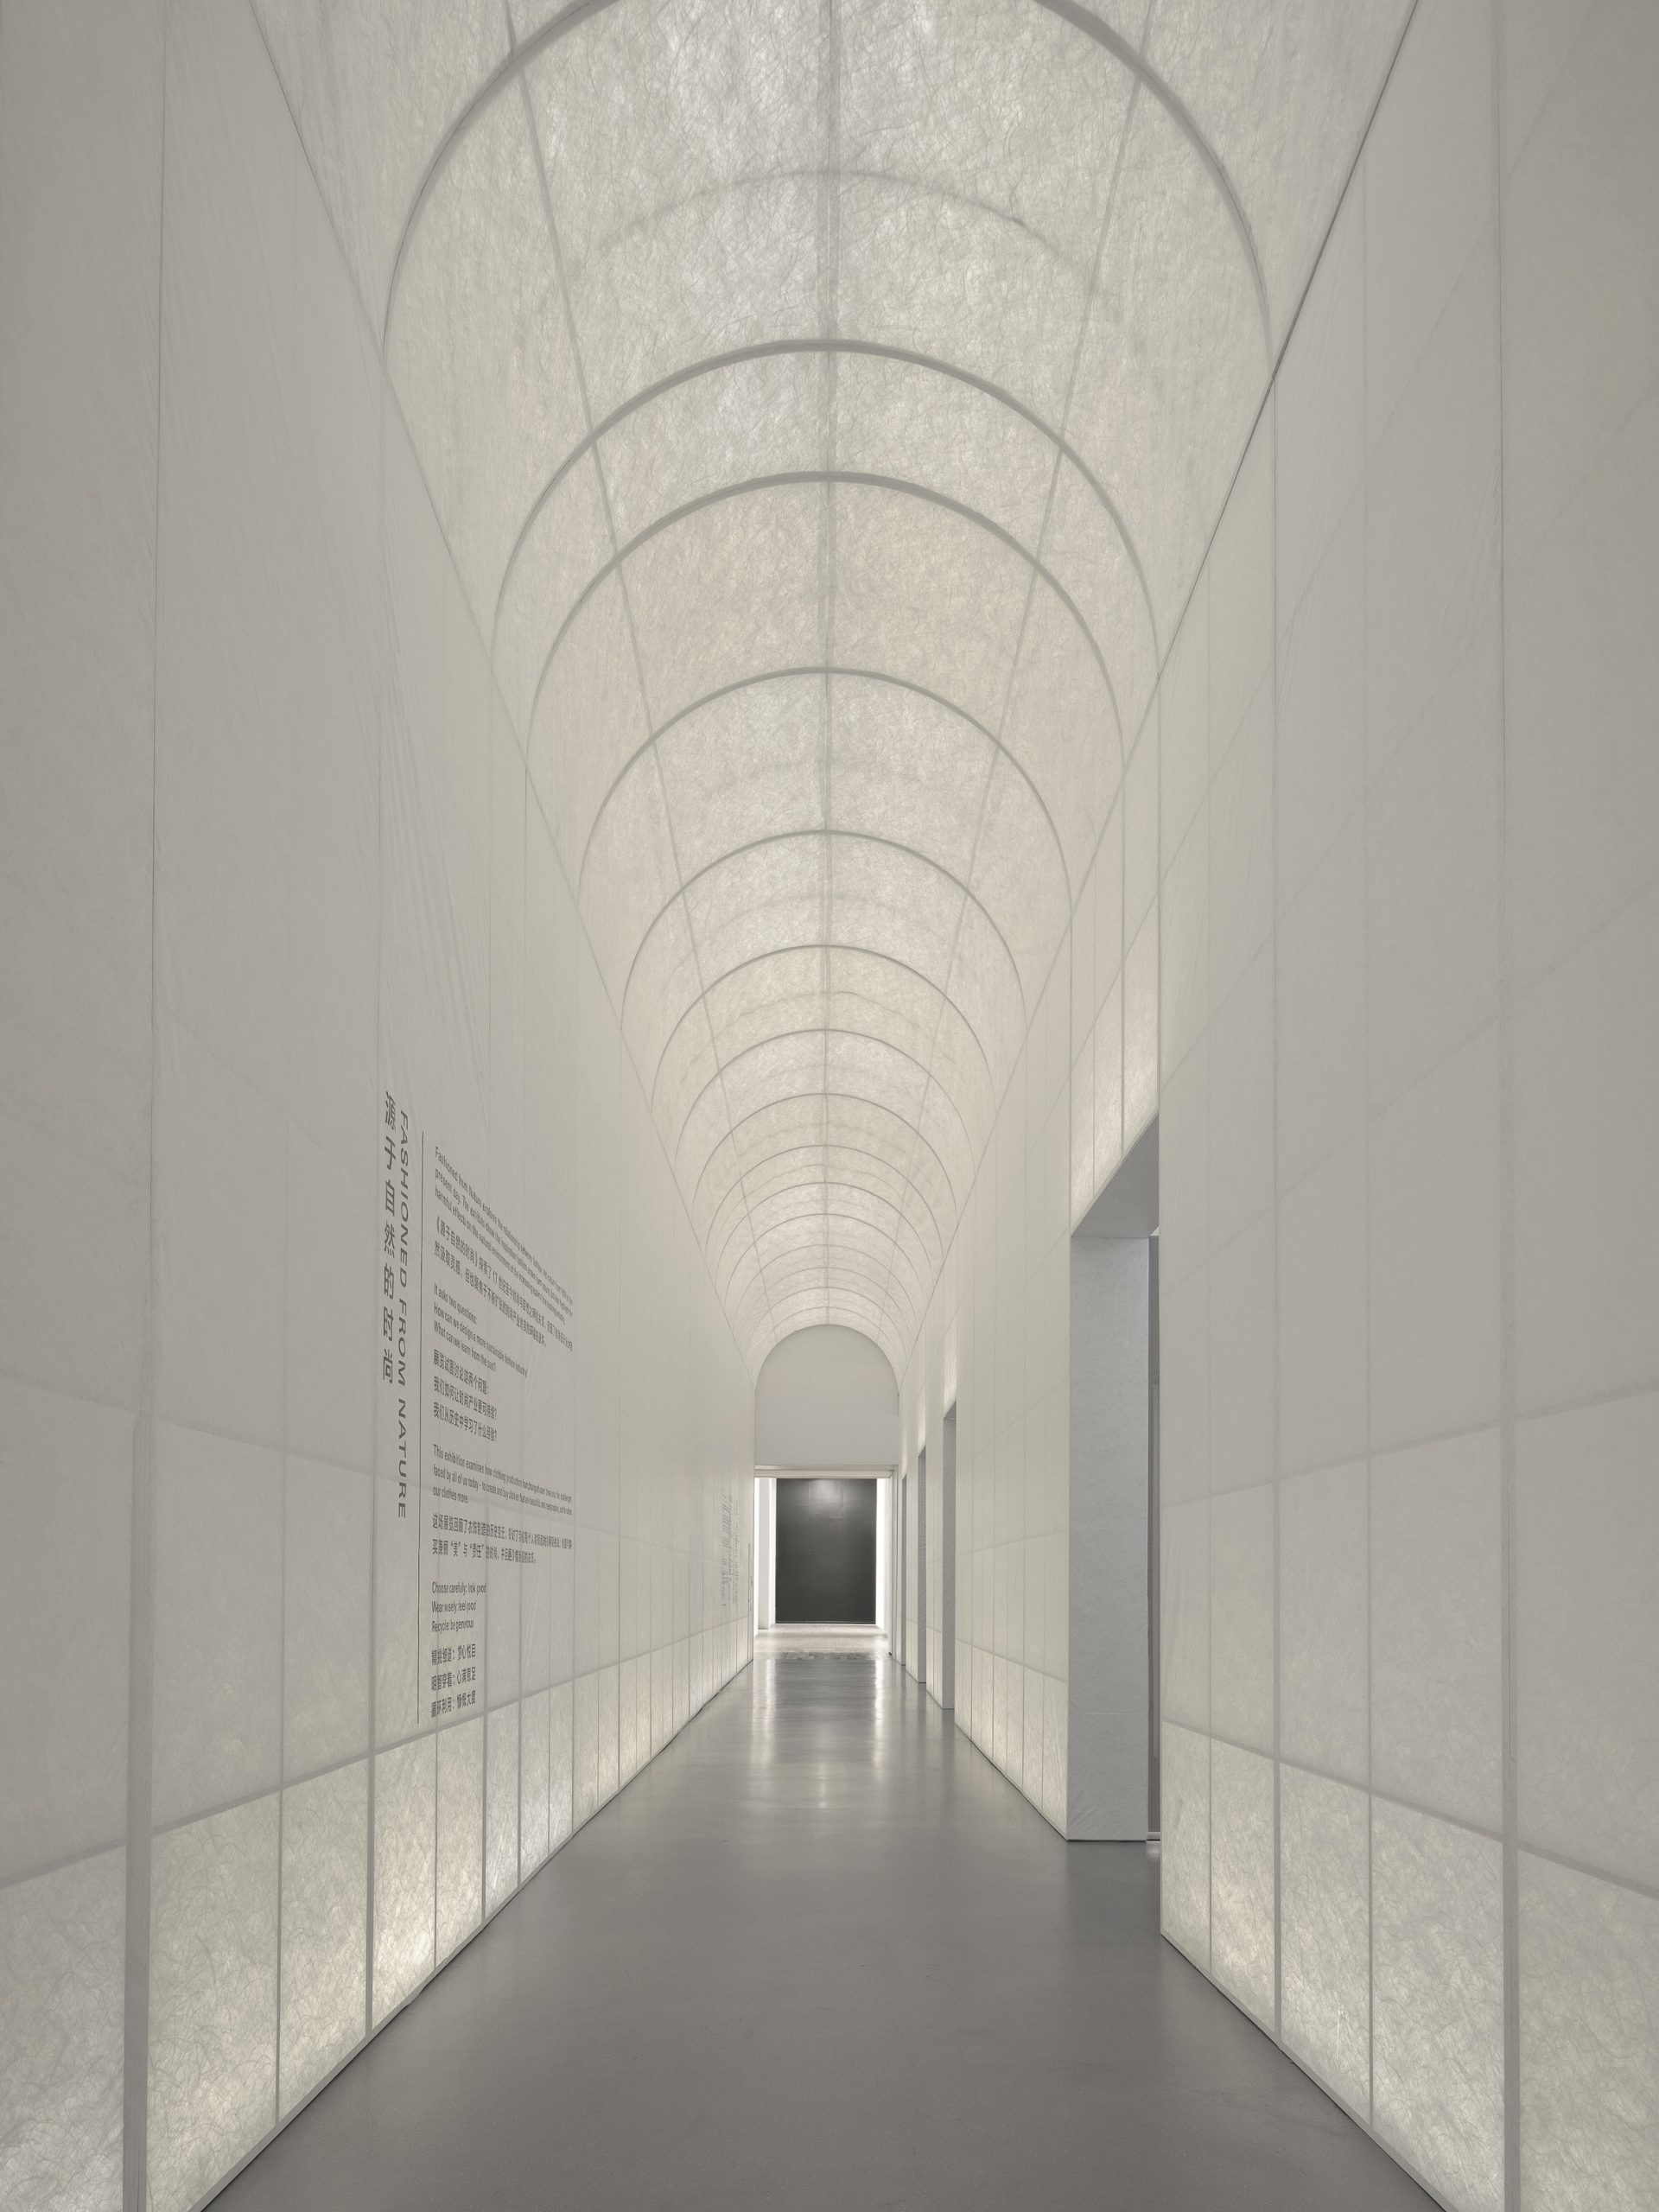 Studio 10 divides up Fashioned from exhibition with translucent corridors